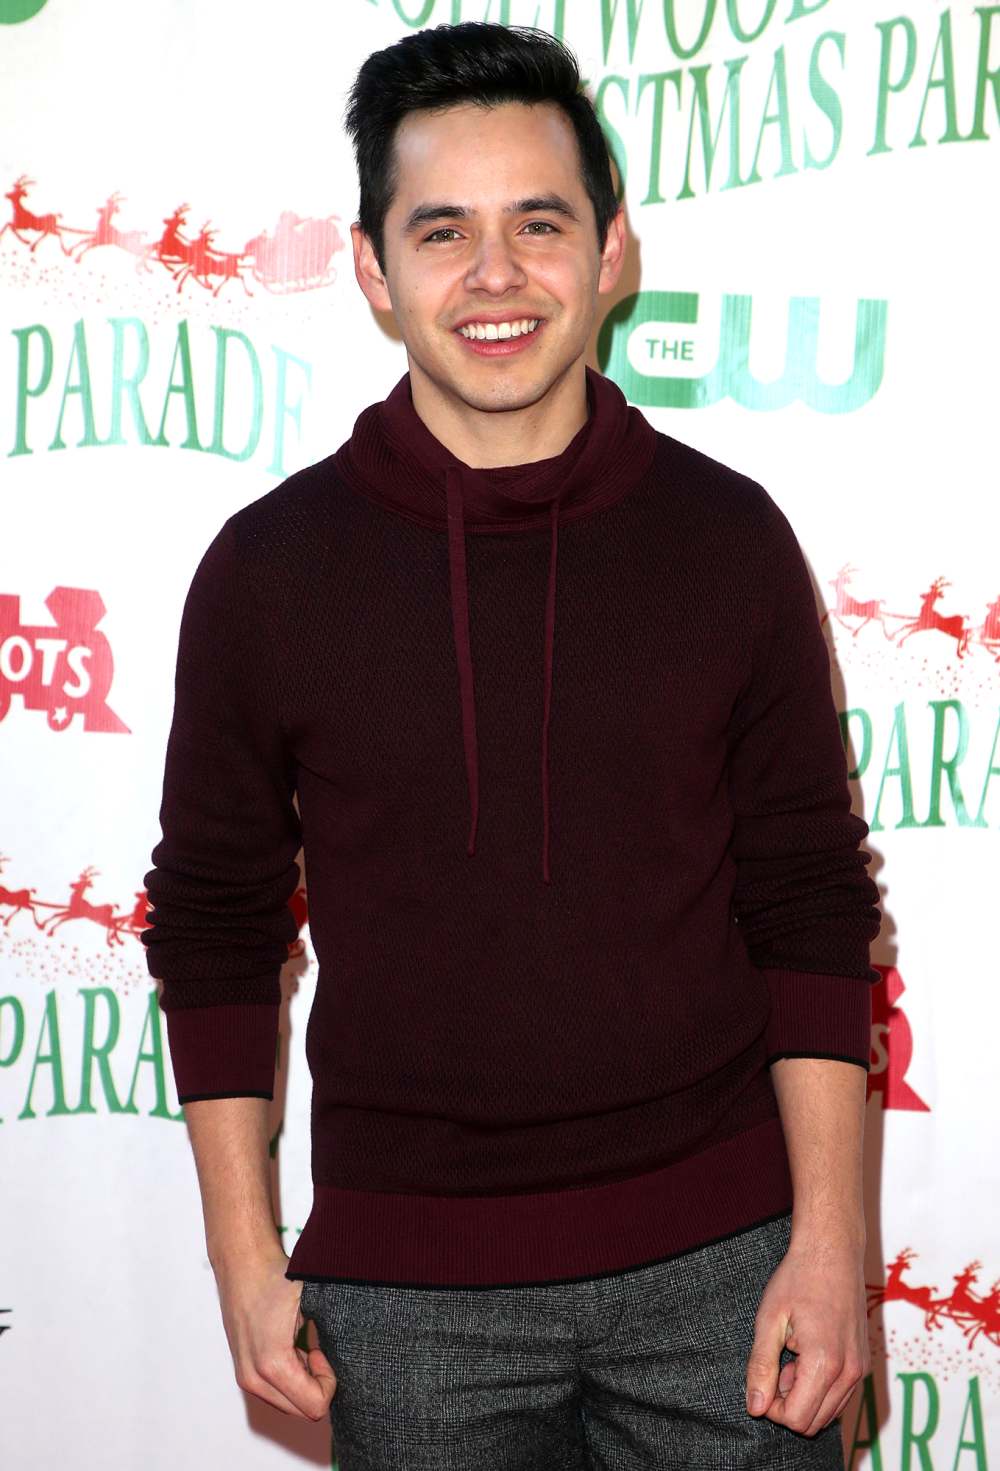 David Archuleta Comes Out: 'I Am Not Sure About My Own Sexuality'